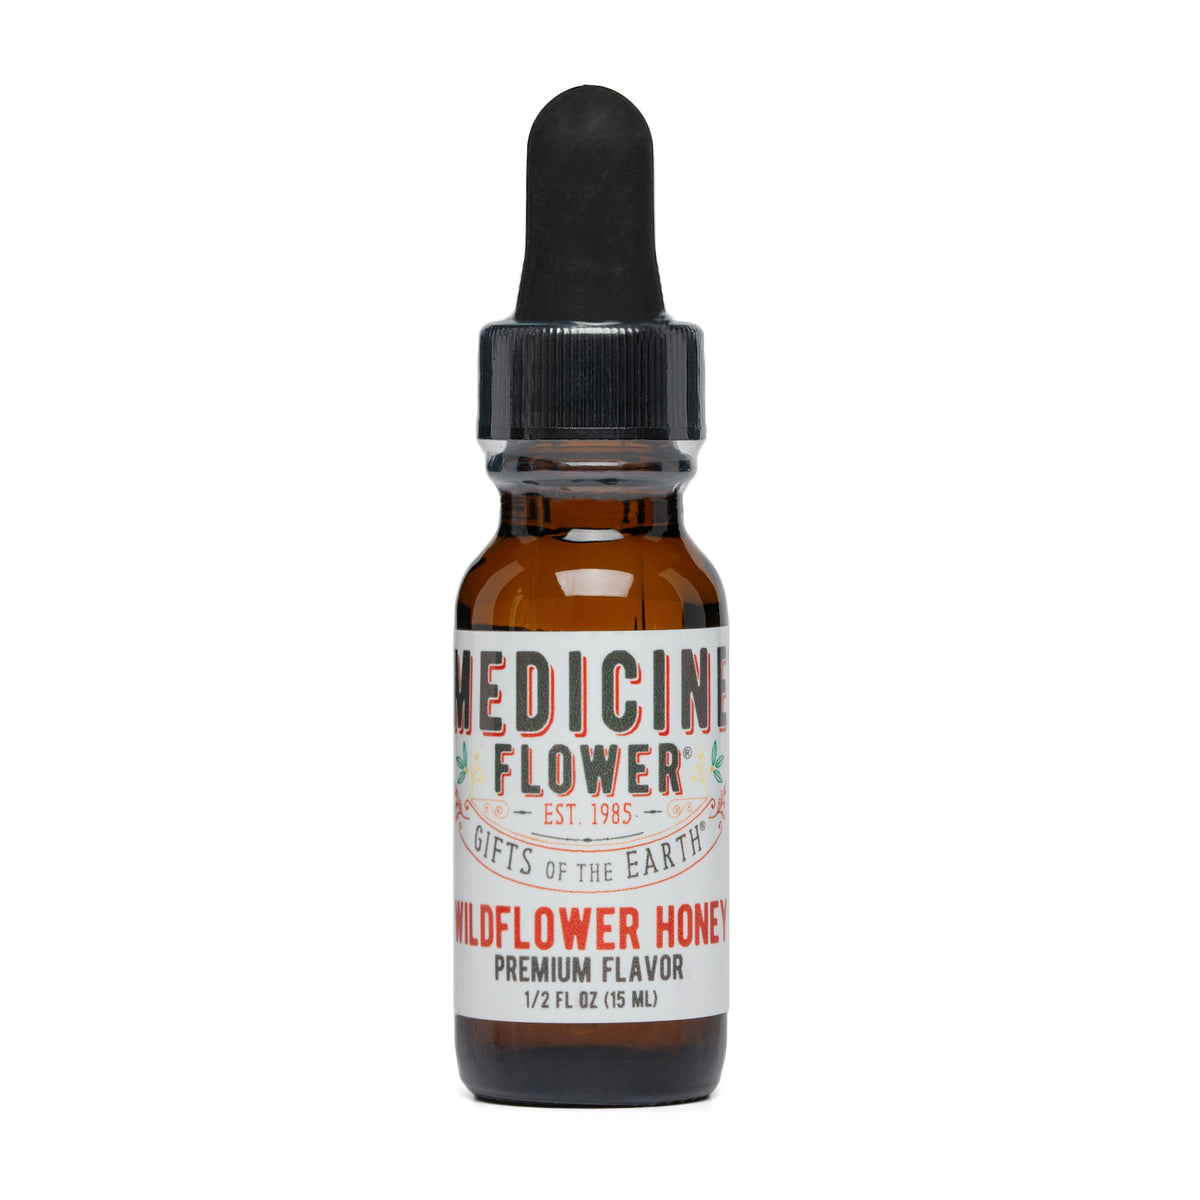 Wildflower Honey Flavour Premium Extract | Medicine Flower | Raw Living UK | Raw Foods | Medicine Flower Wildflower Honey Flavour Premium Extract (1/2oz) is pure, potent &amp; natural. Amazing taste, with no alcohol or artificial preservatives.